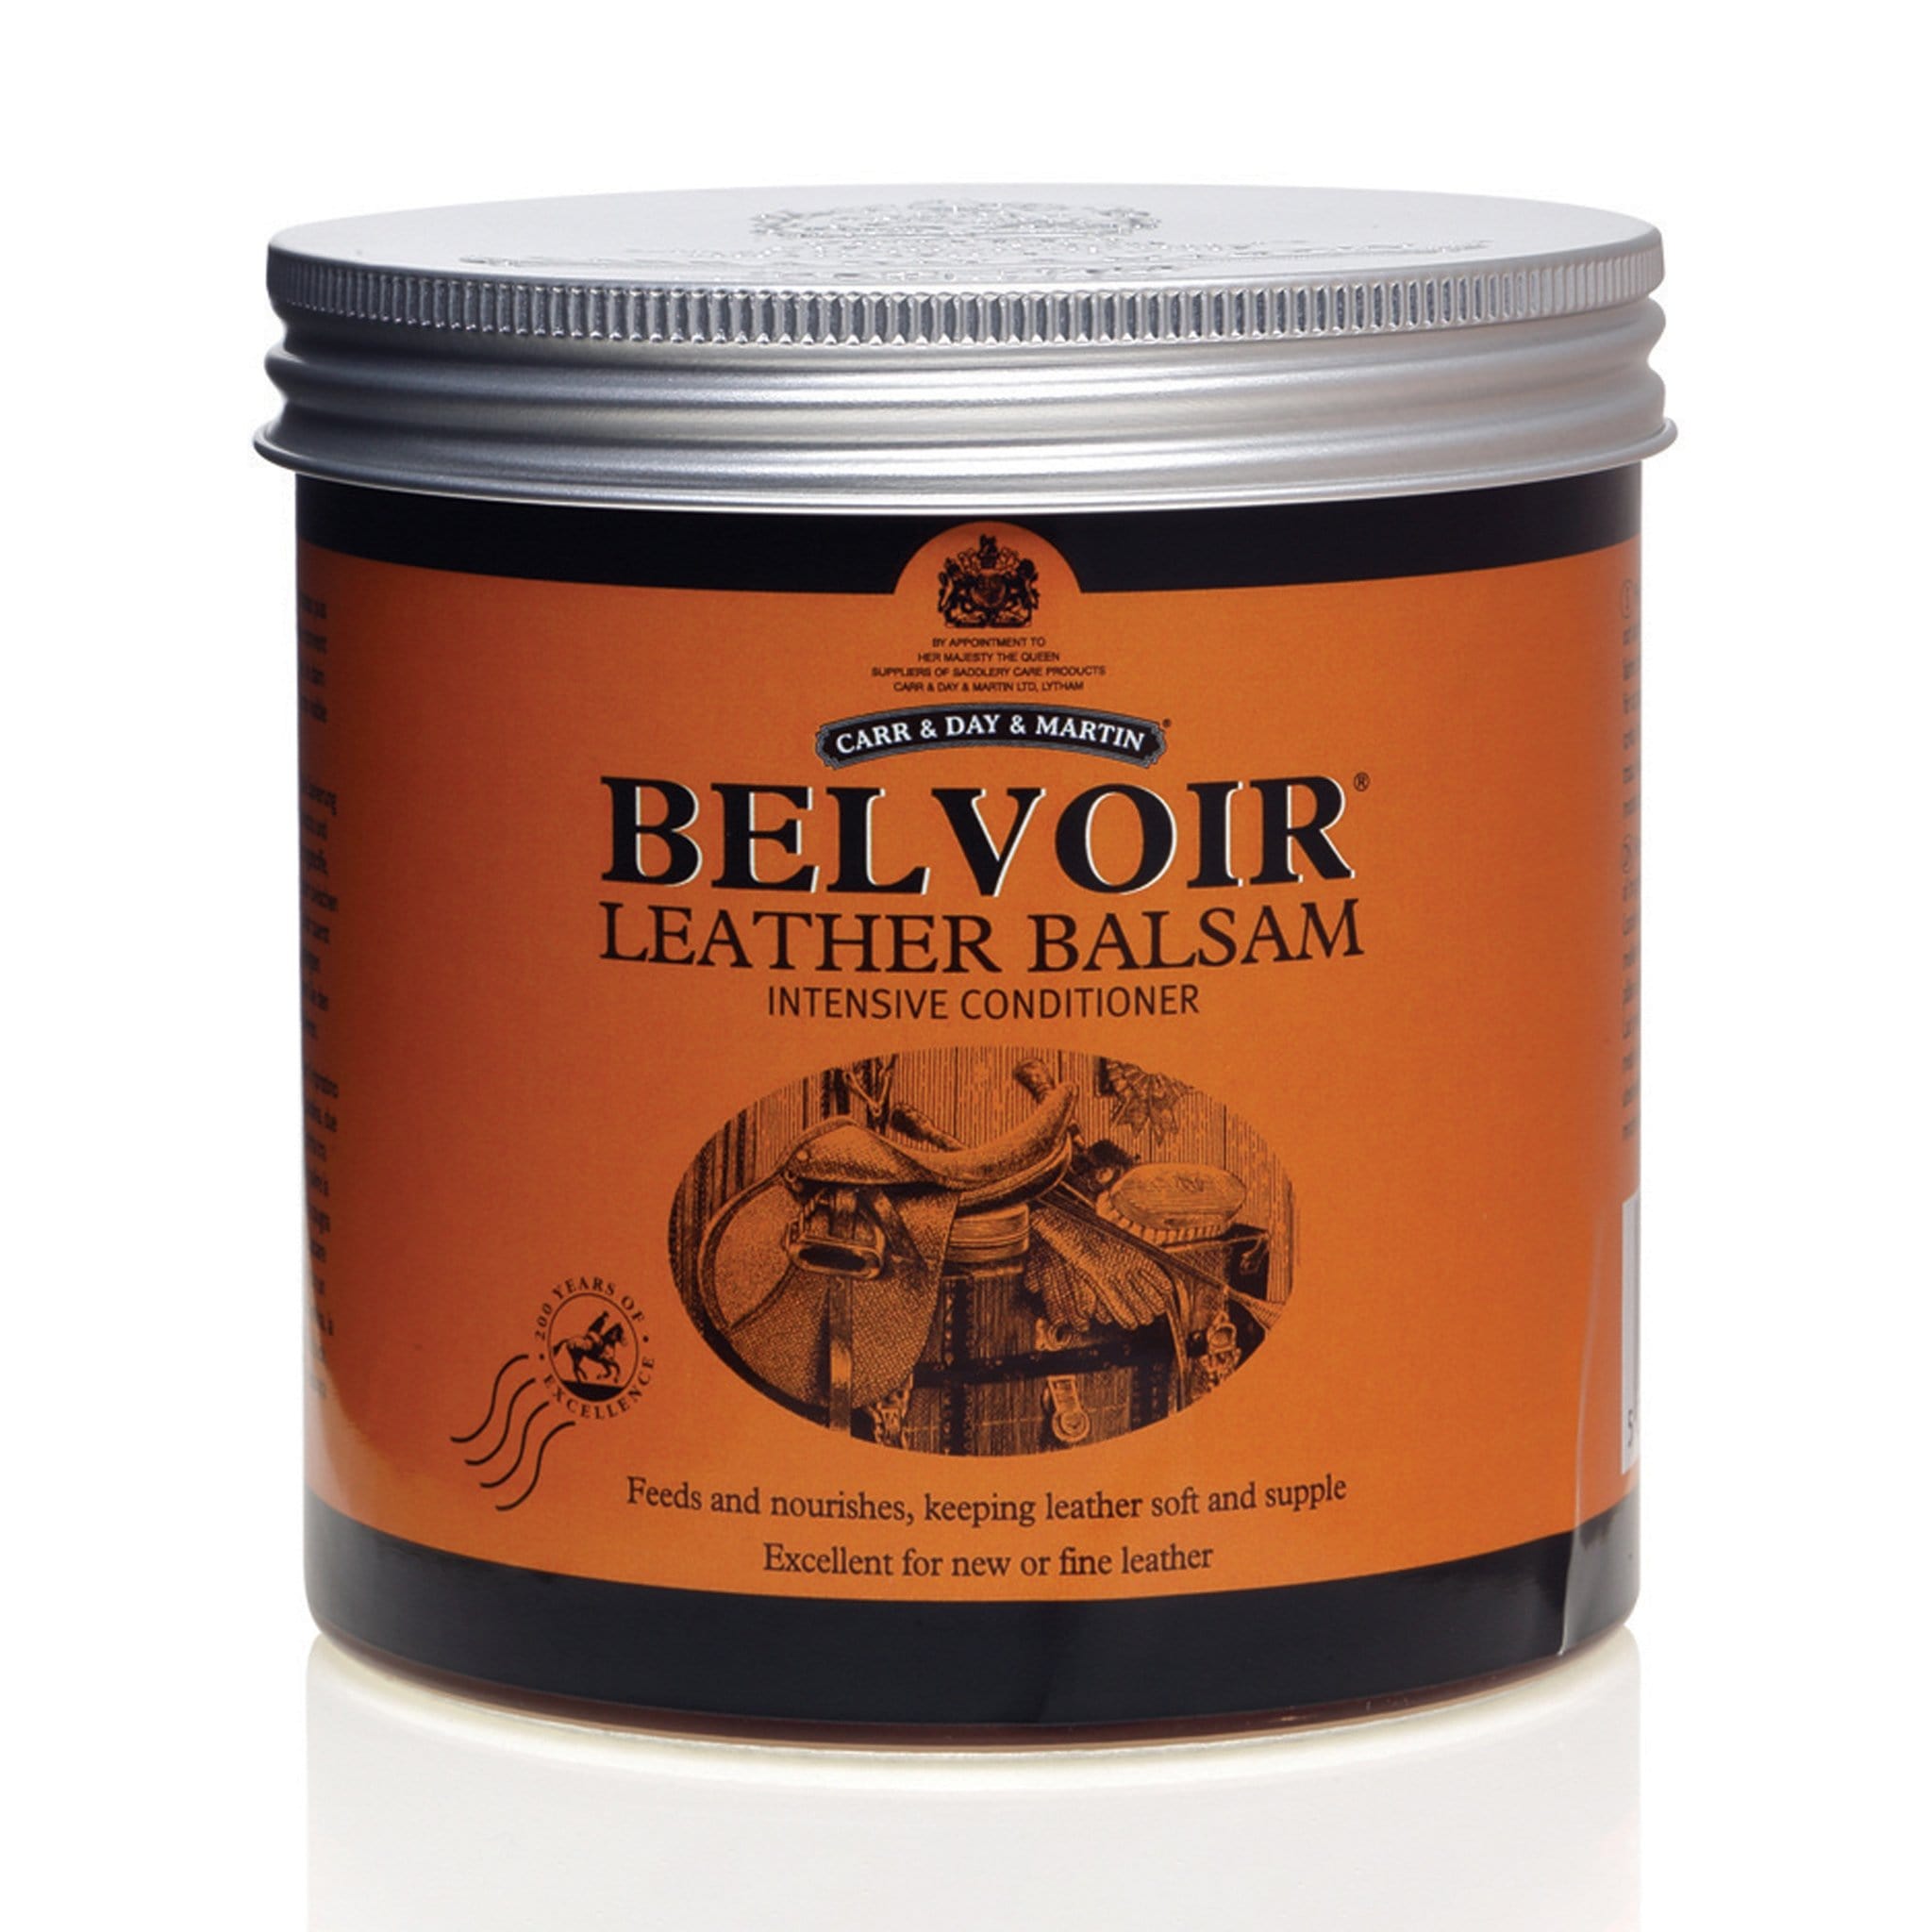 Carr & Day & Martin Belvoir Leather Balsam Intensive Conditioner 4914